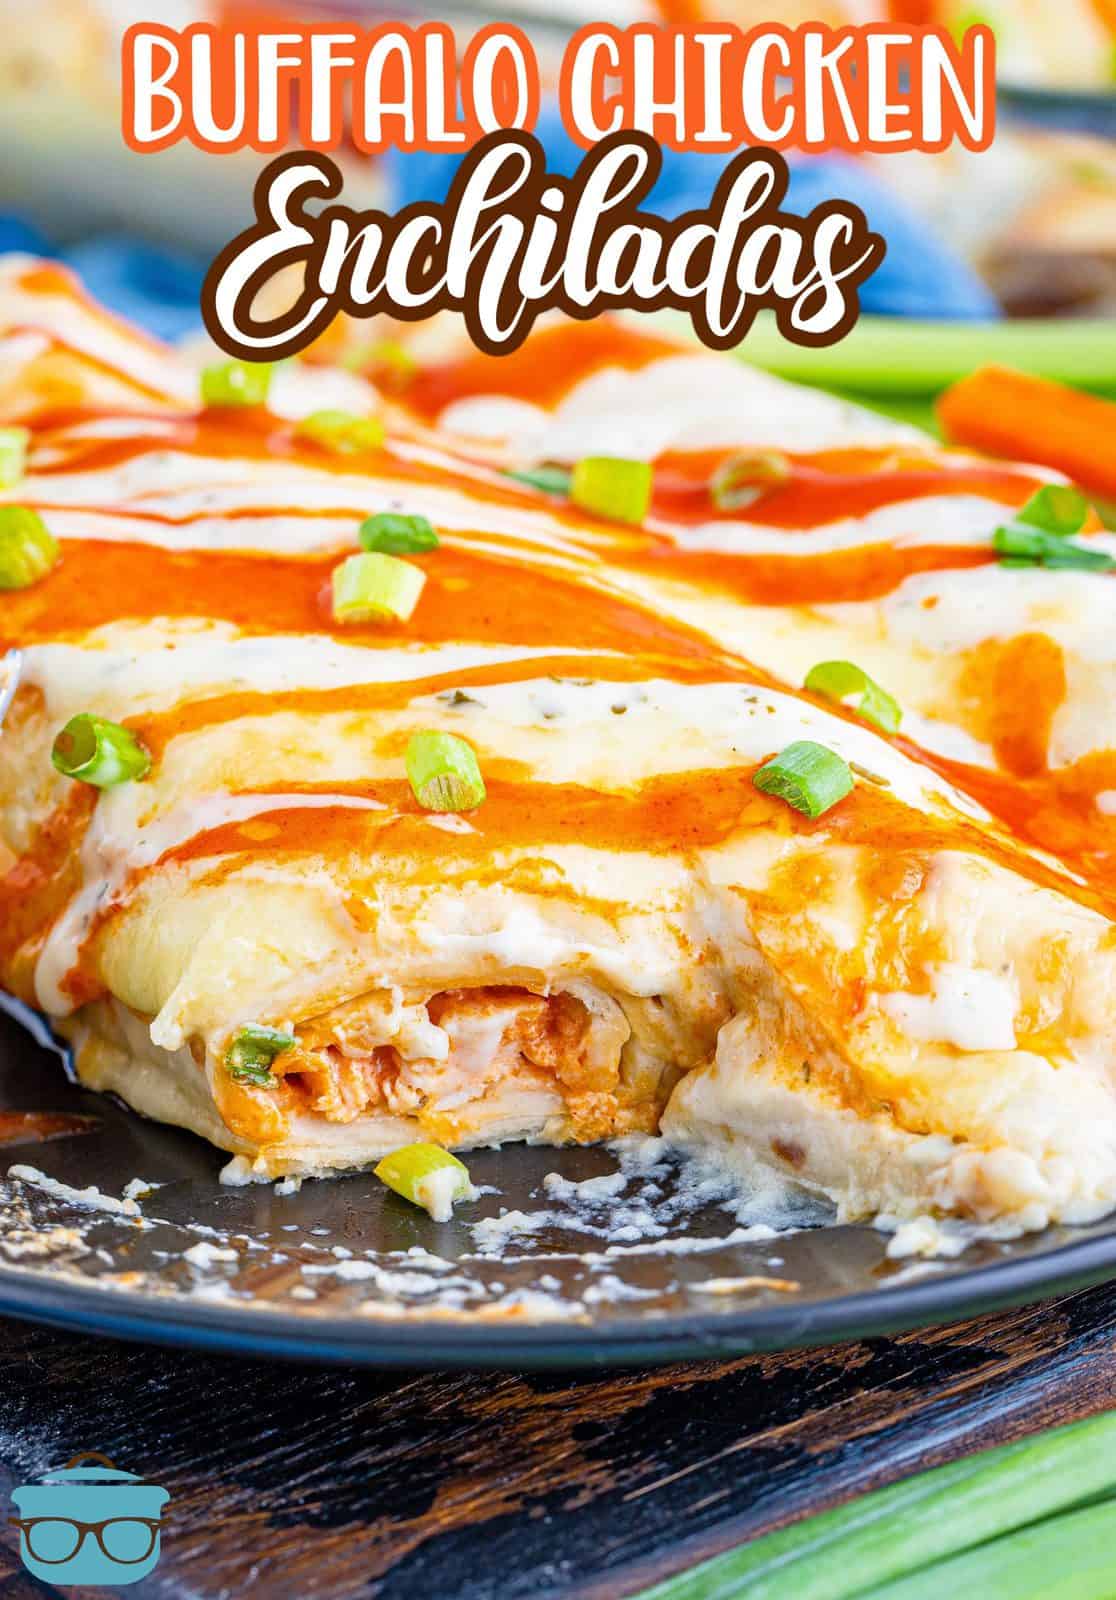 Pinterest image of Buffalo Chicken Enchiladas with bite taken out of one showing inside.